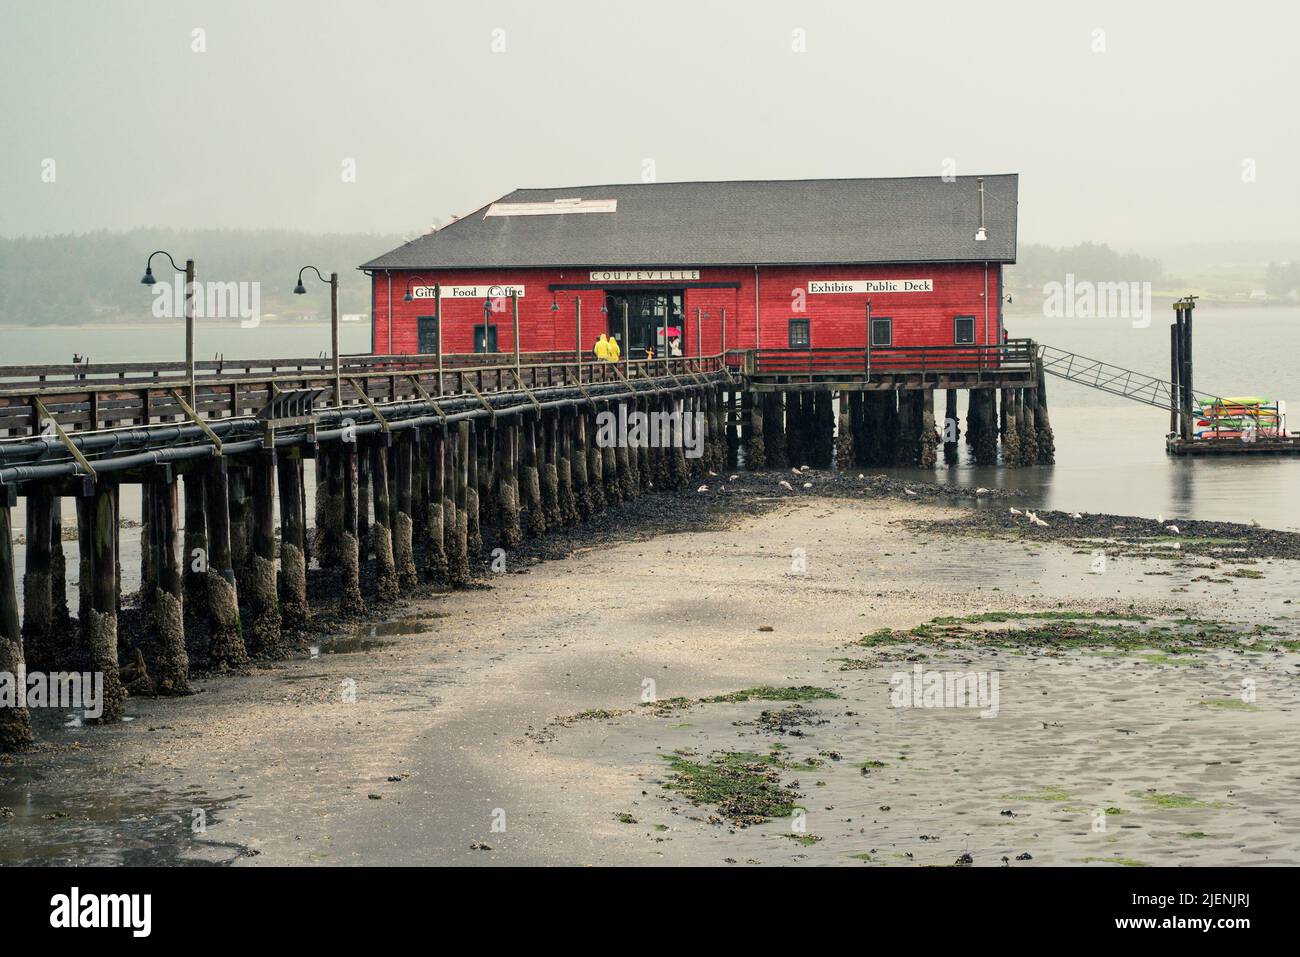 View from Coupeville Washington on Whidbey Island with pier and historic building in view, on a rainy day Stock Photo